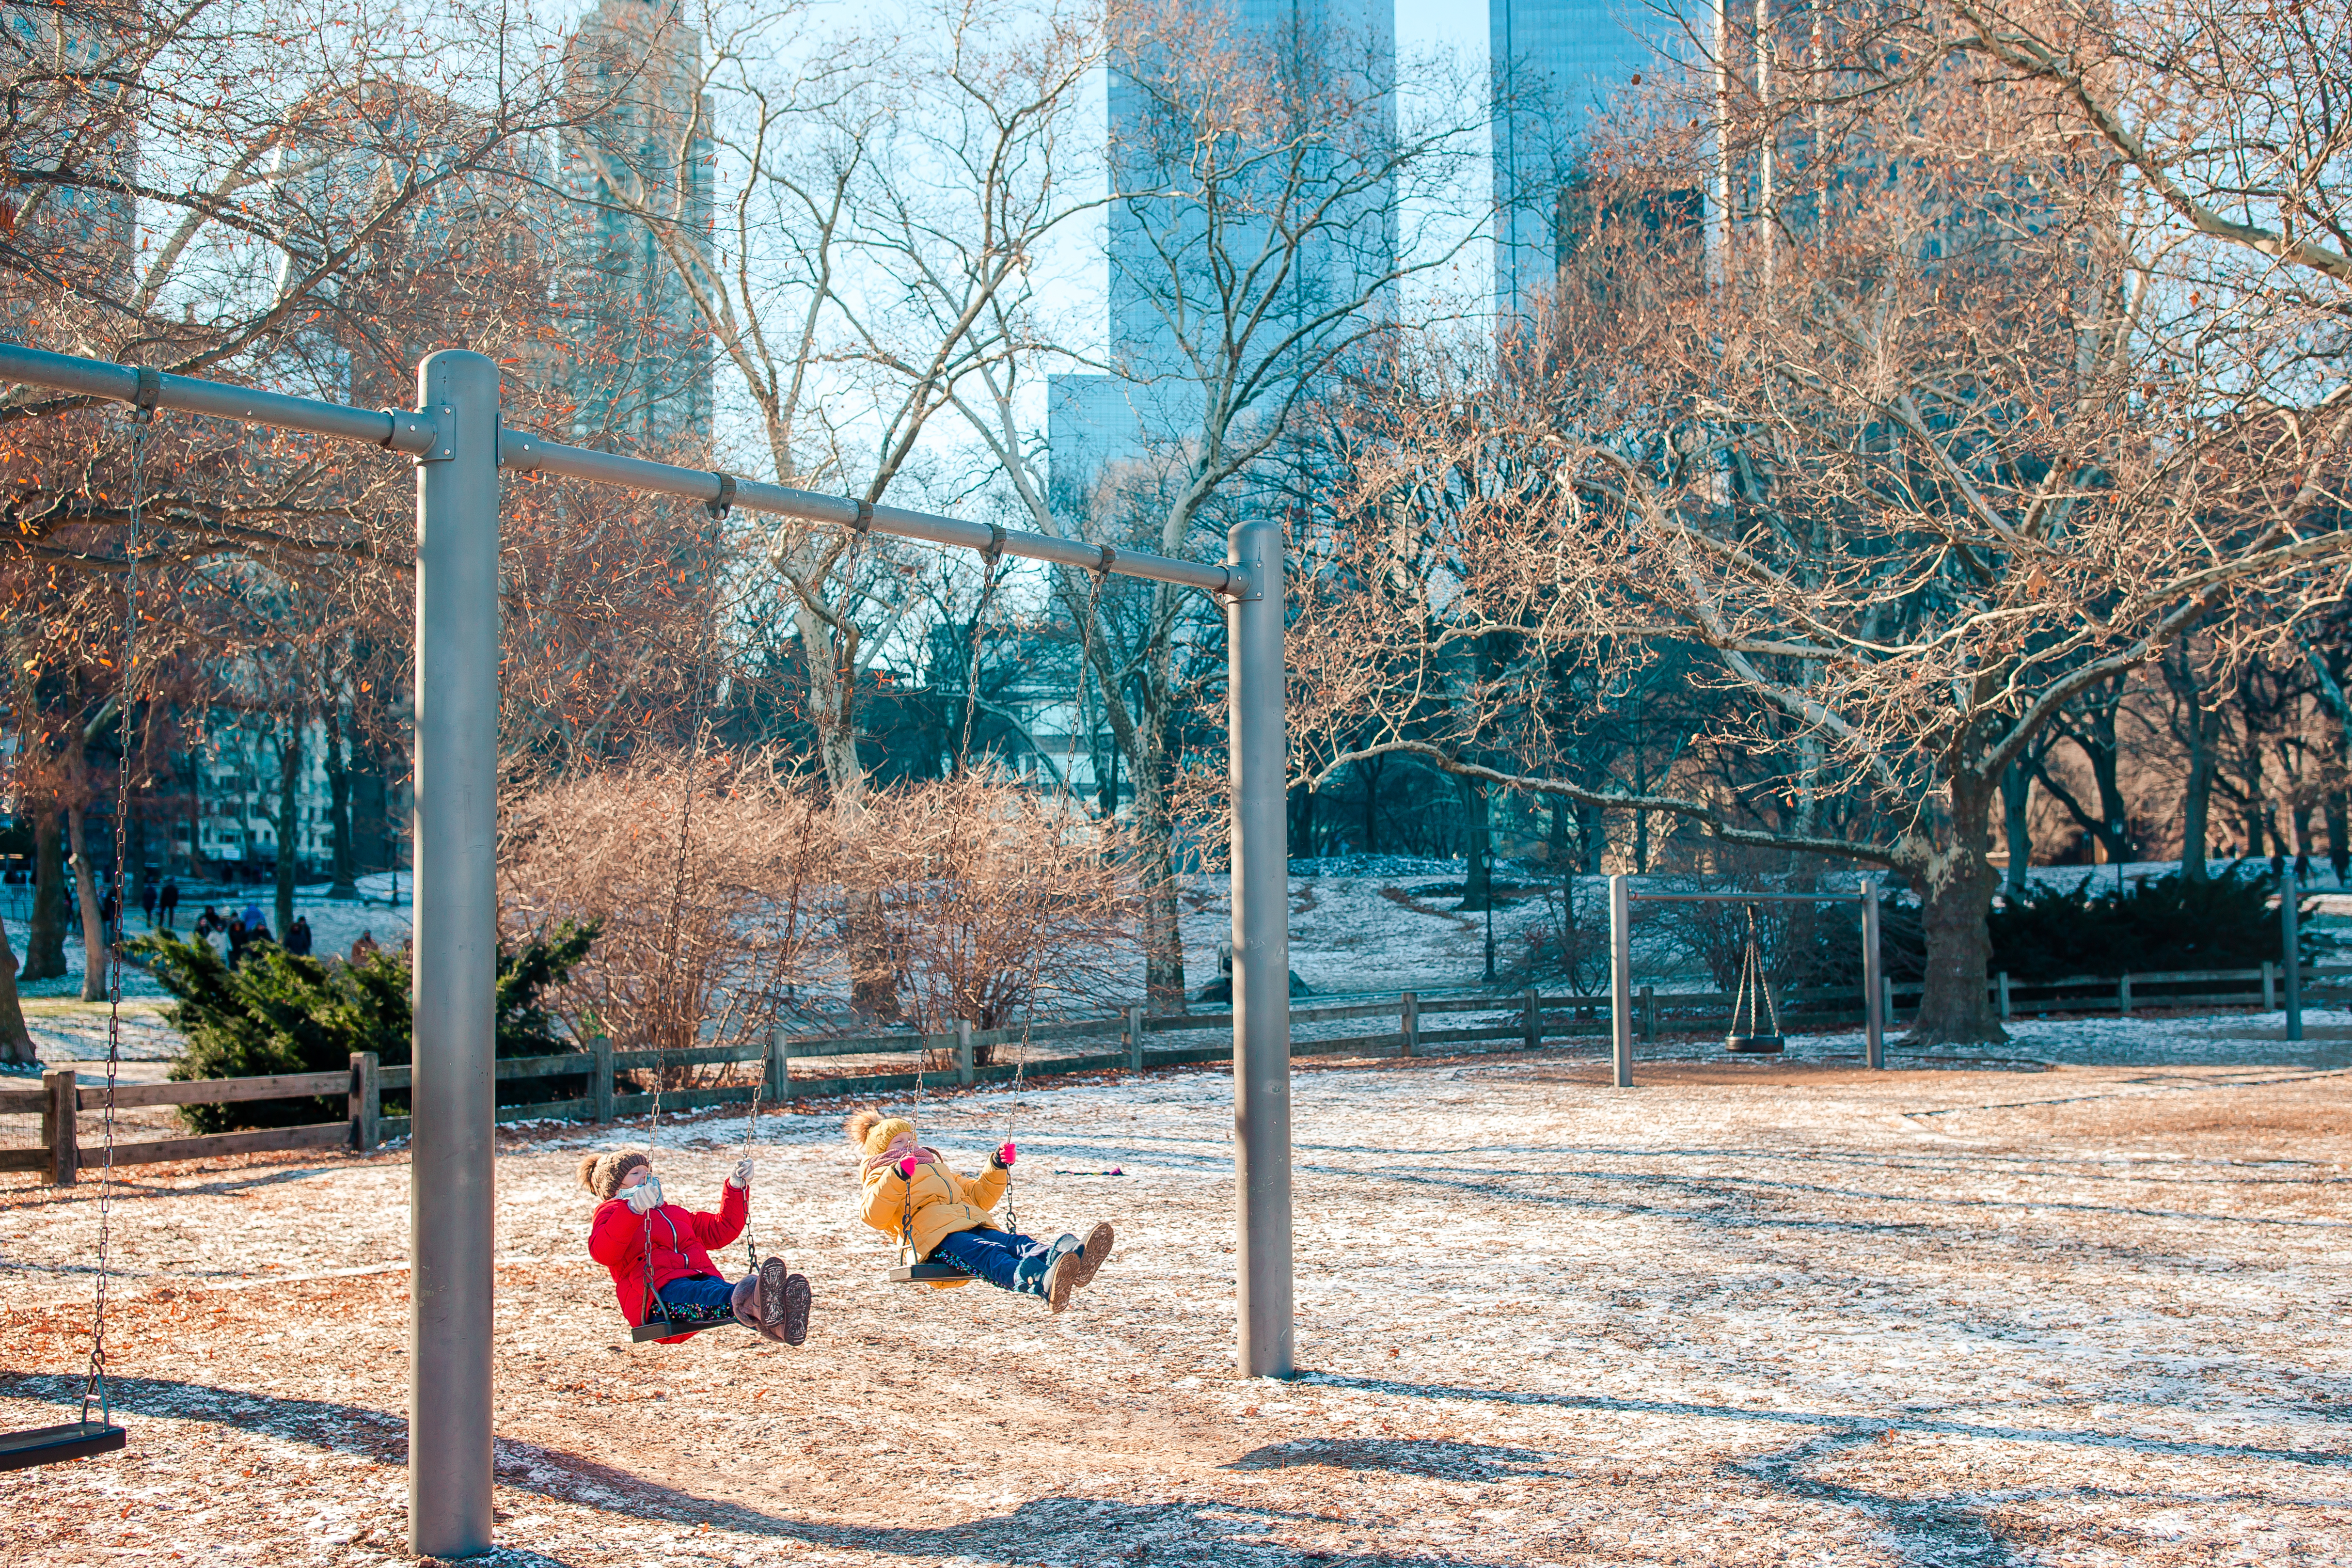 Two young kids on a swing set in a Manhattan park.